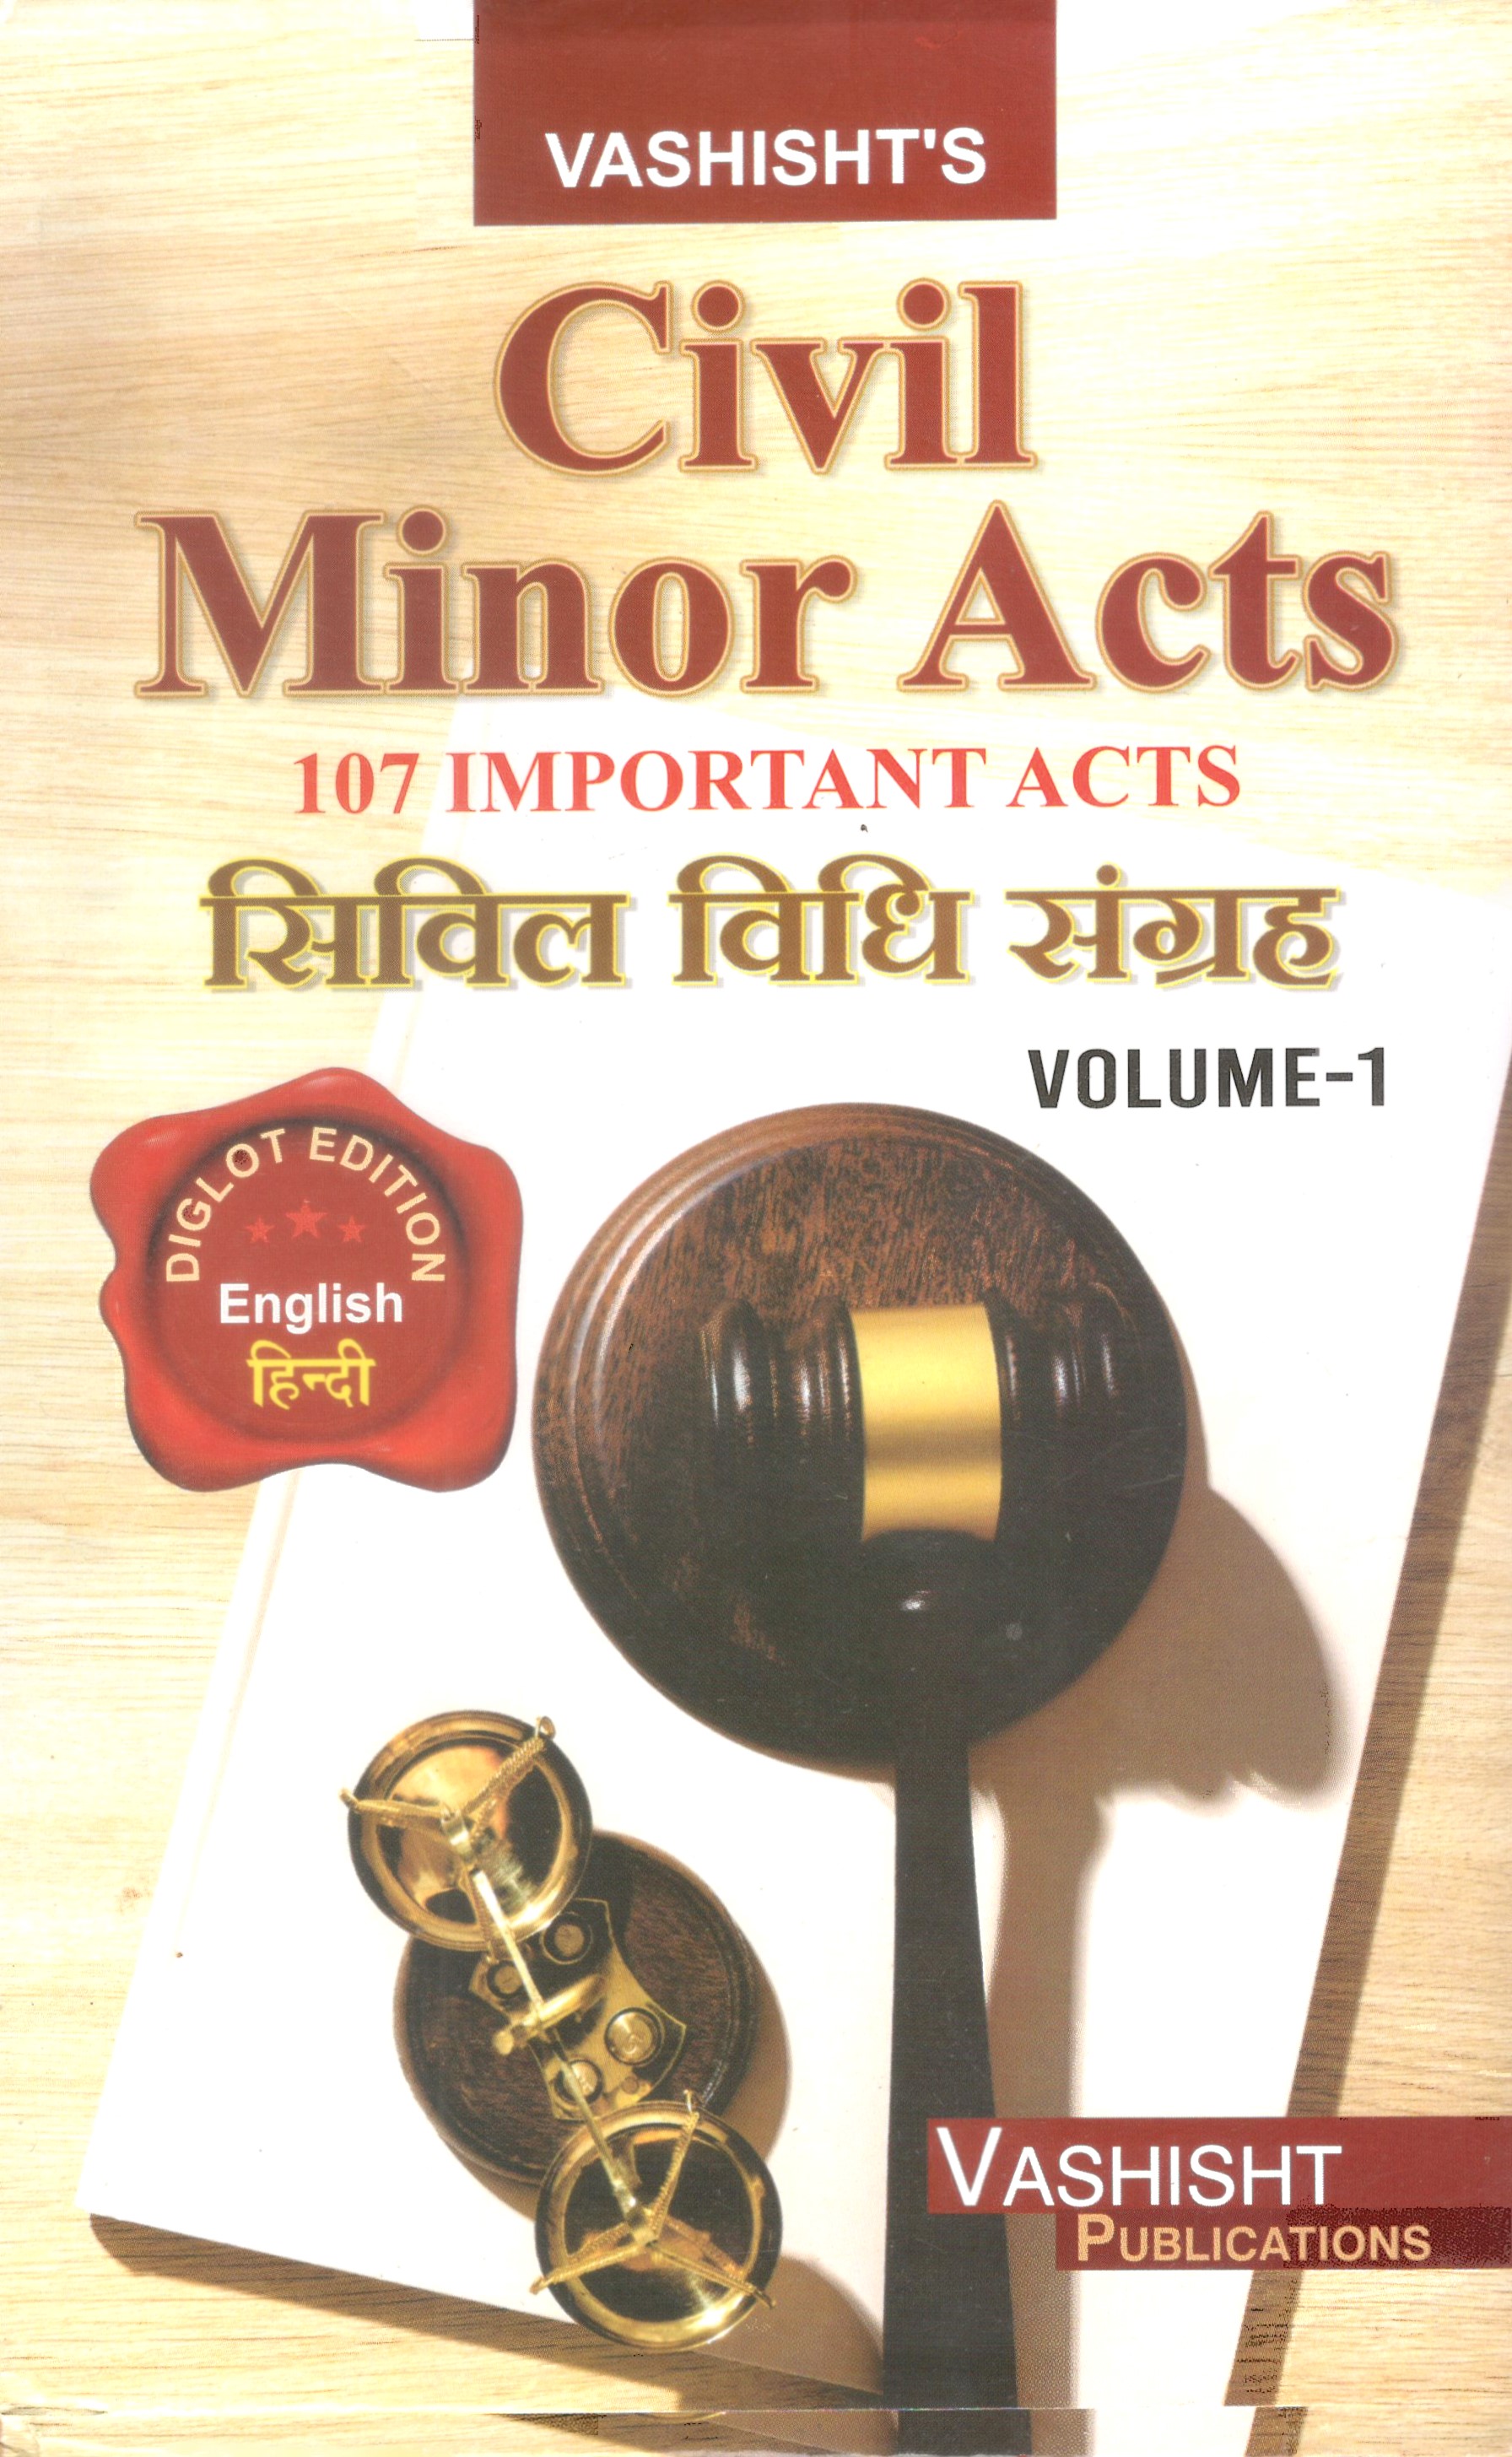 civil Minor Acts / सिविल विधि संग्रह [107 Important Acts in 2 Volumes]